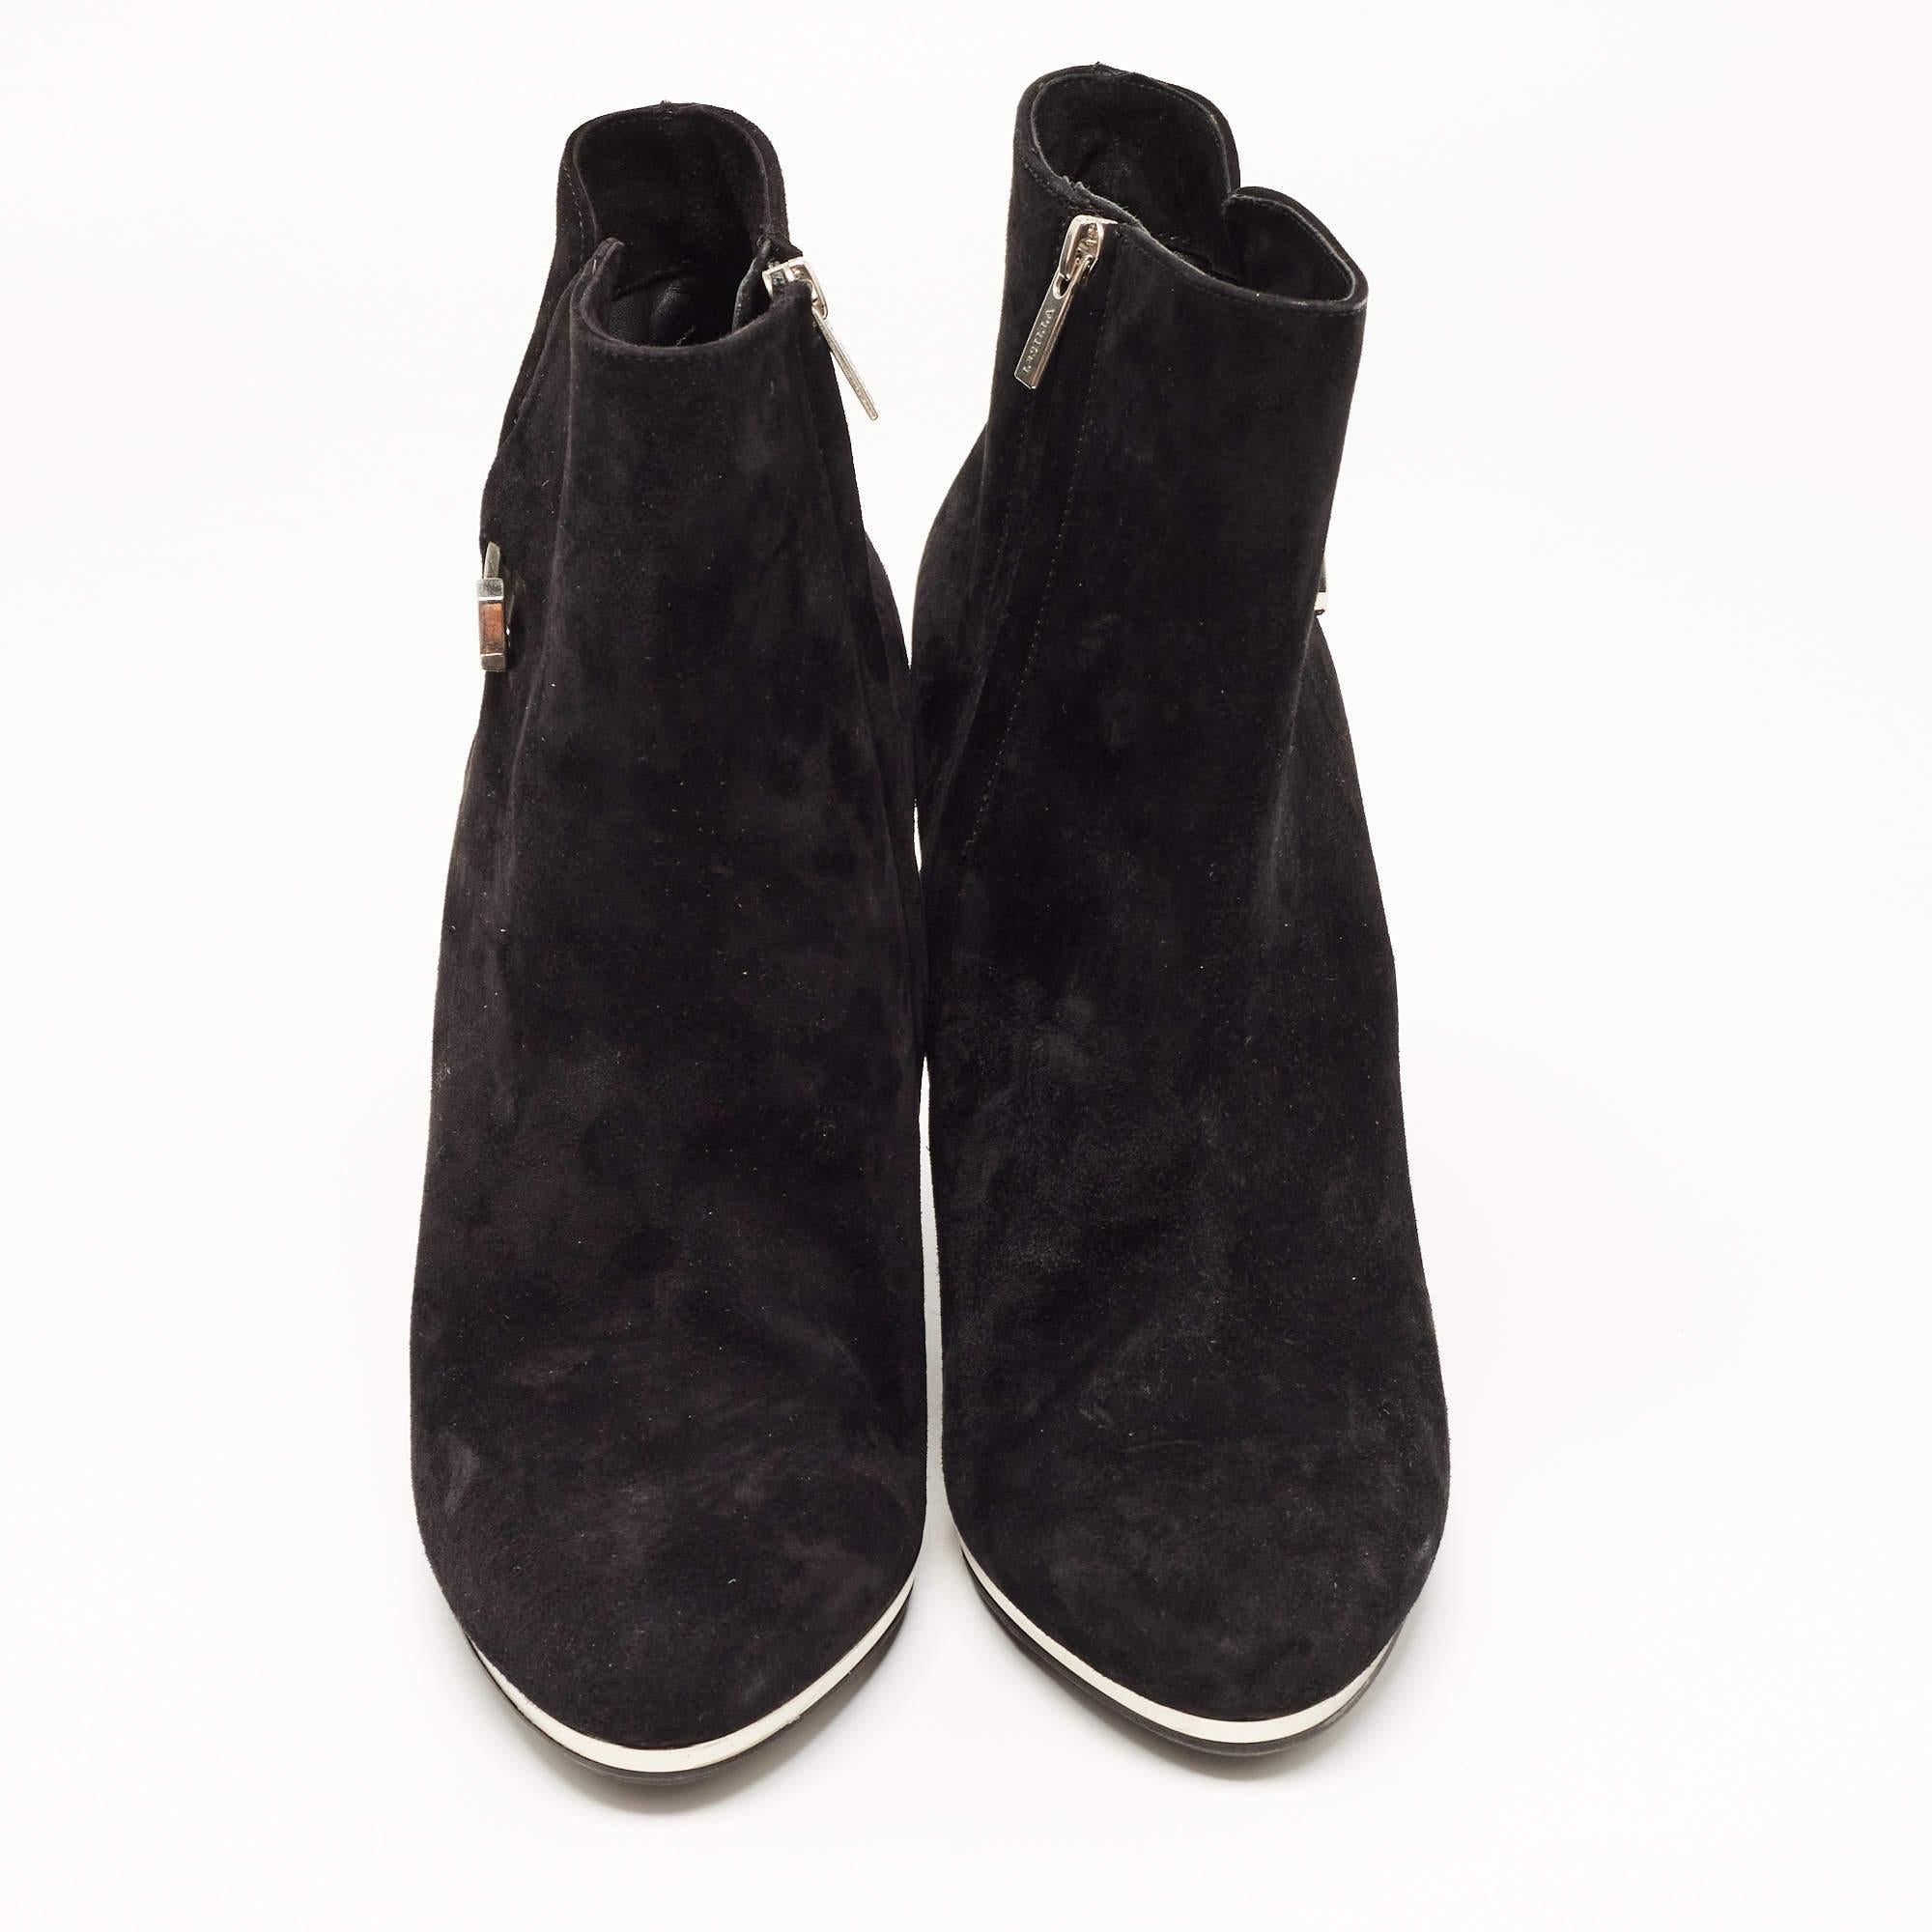 Meticulously designed into a smart silhouette, these boots are on-point with style. They come with comfortable insoles and durable outsoles to last you forever. These boots are just amazing, and you definitely need to get them right